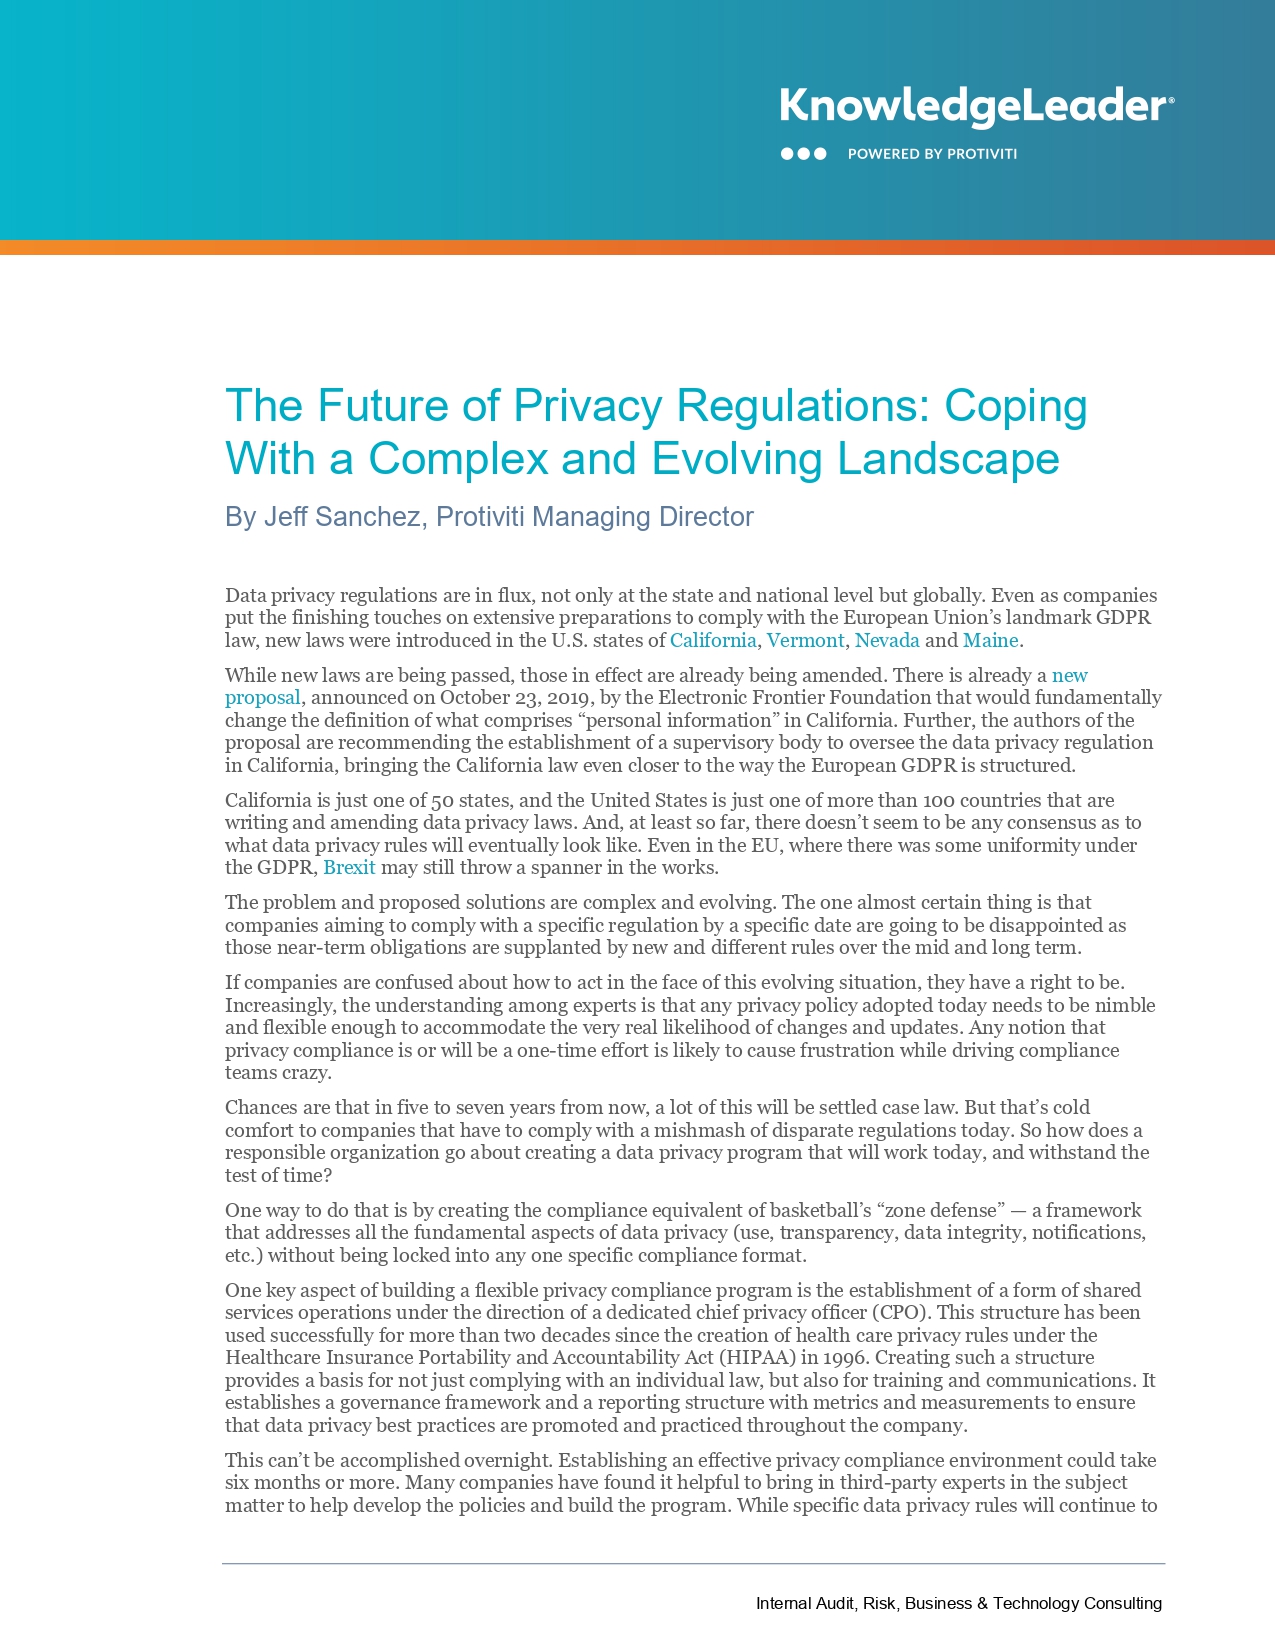 Screenshot of the first page of The Future of Privacy Regulations: Coping With a Complex and Evolving Landscape